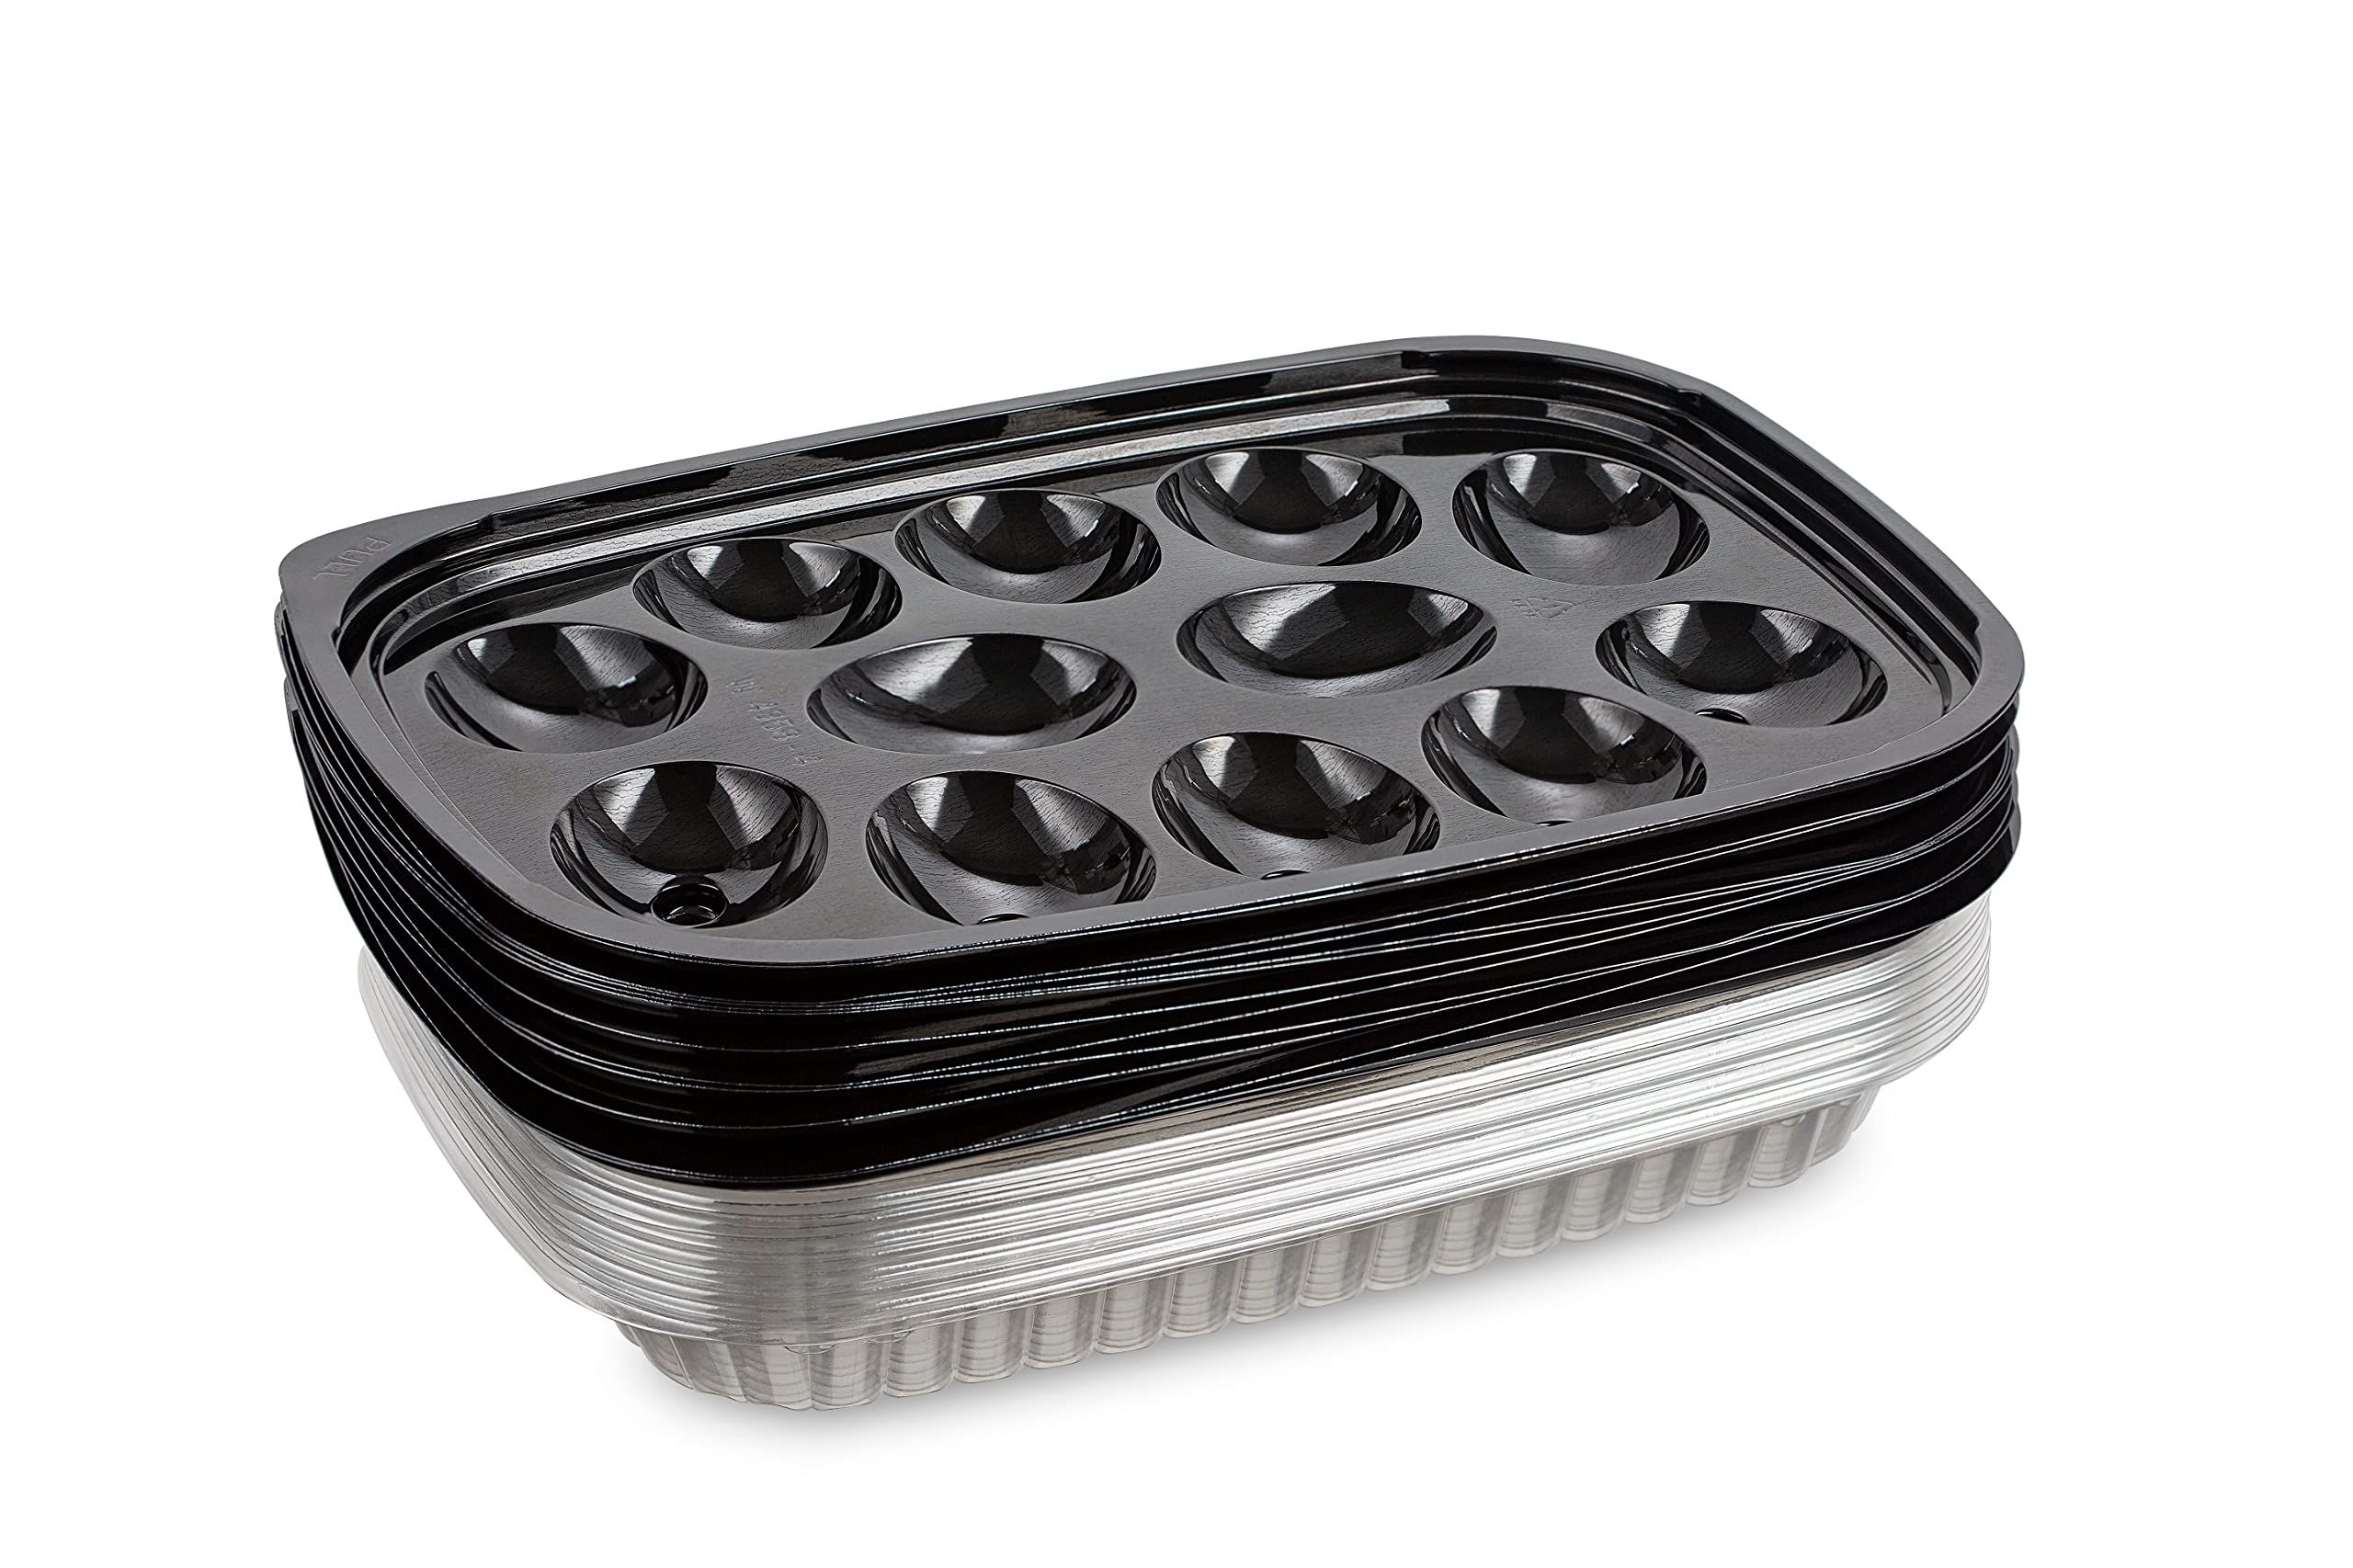 30 Count Deviled Egg Disposable Tray with lid